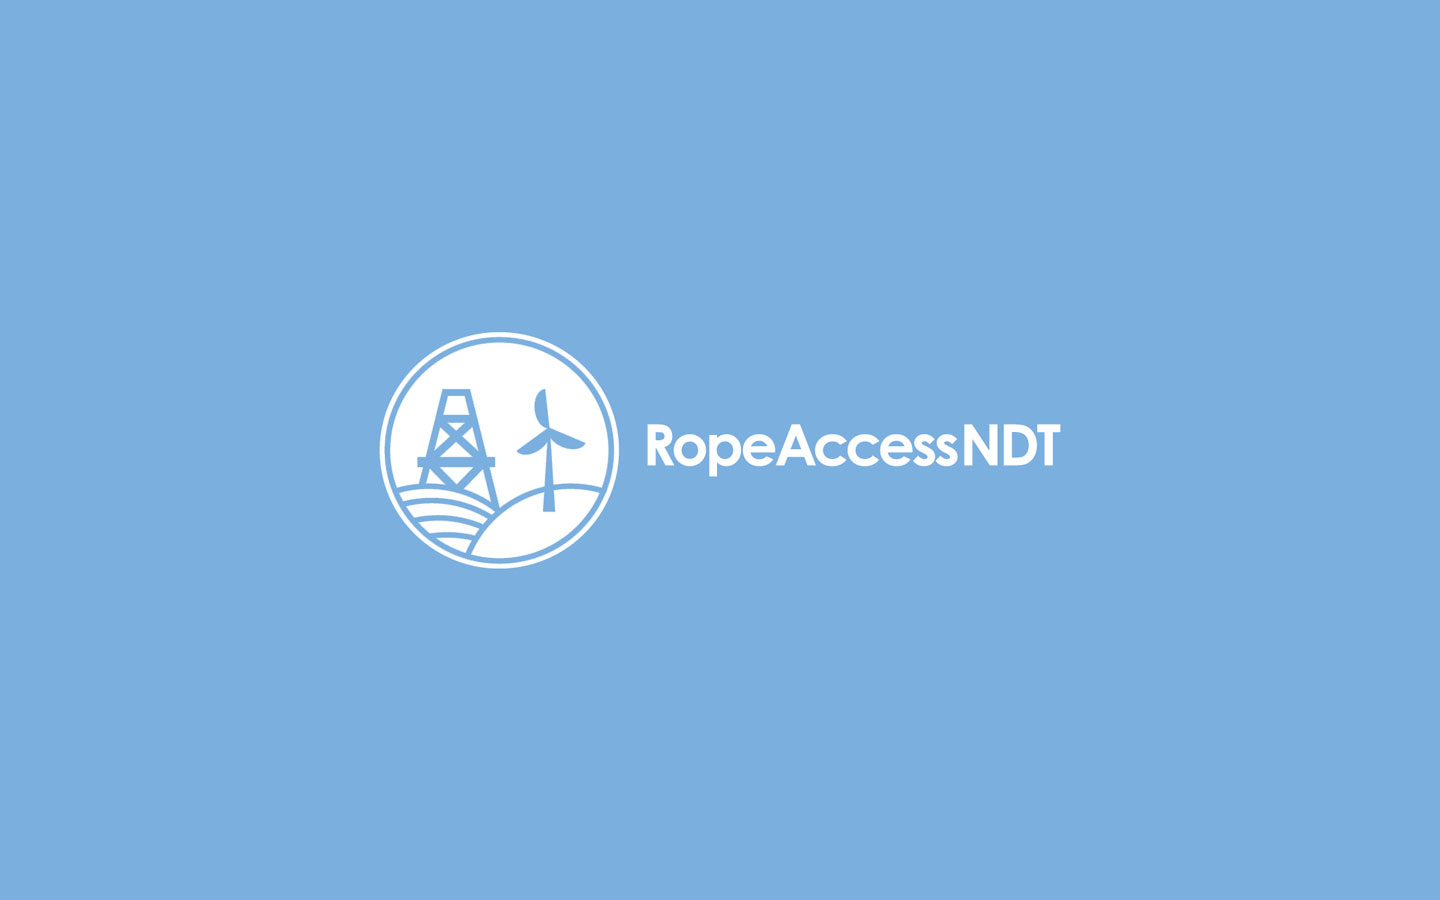 Rope Access NDT, Logo Design in White on Brand Colour